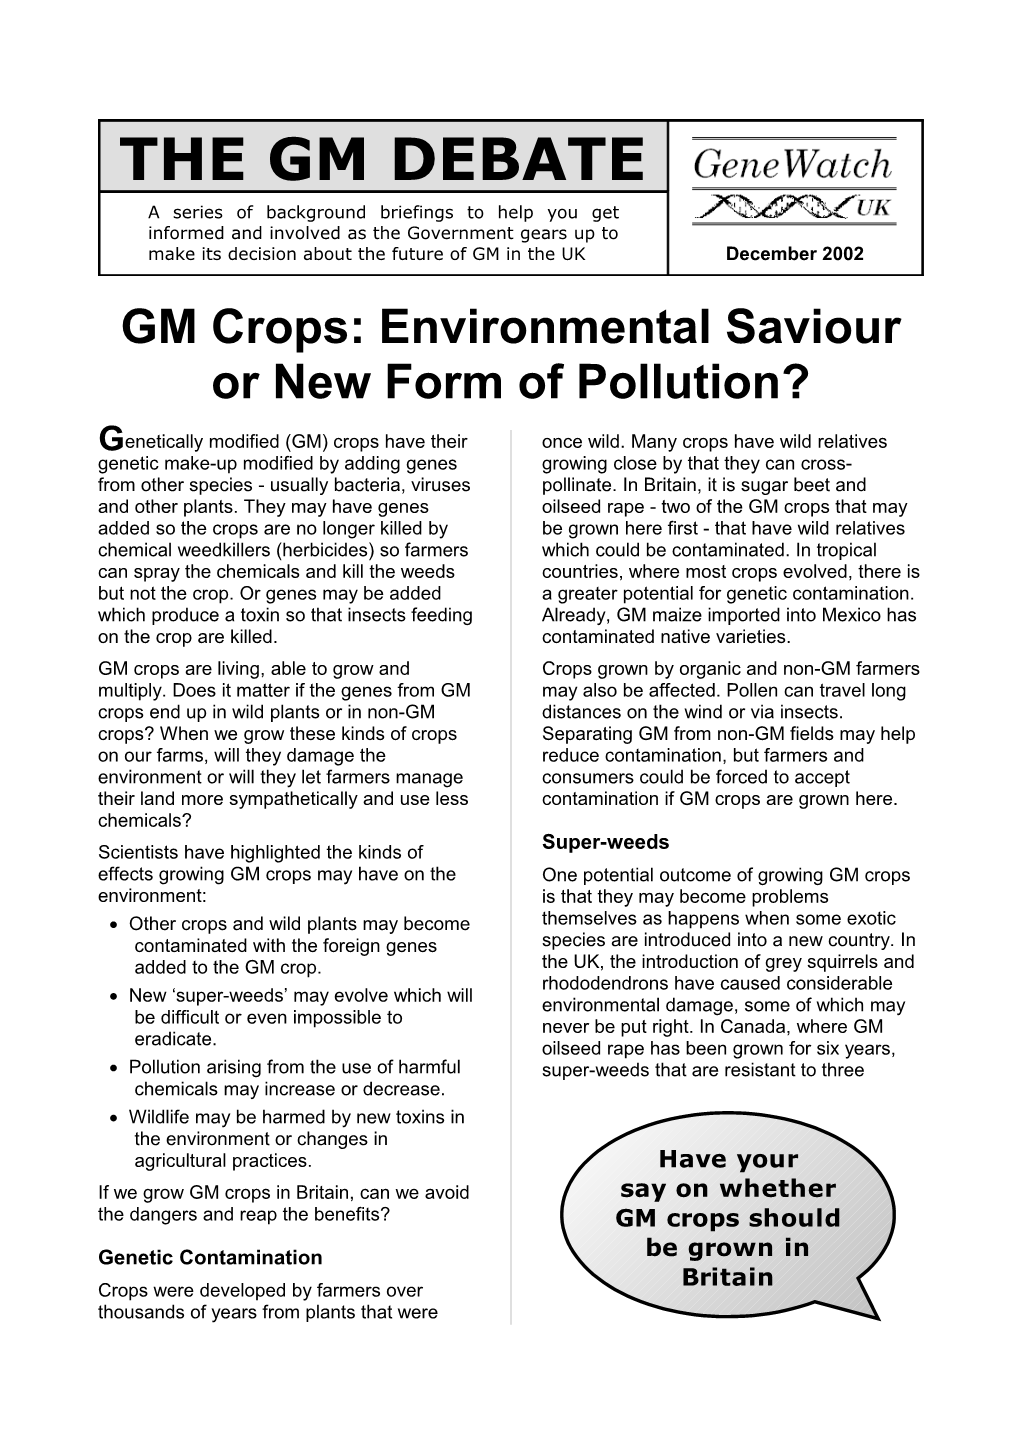 GM Crops - Environmental Saviour Or New Form of Pollution?